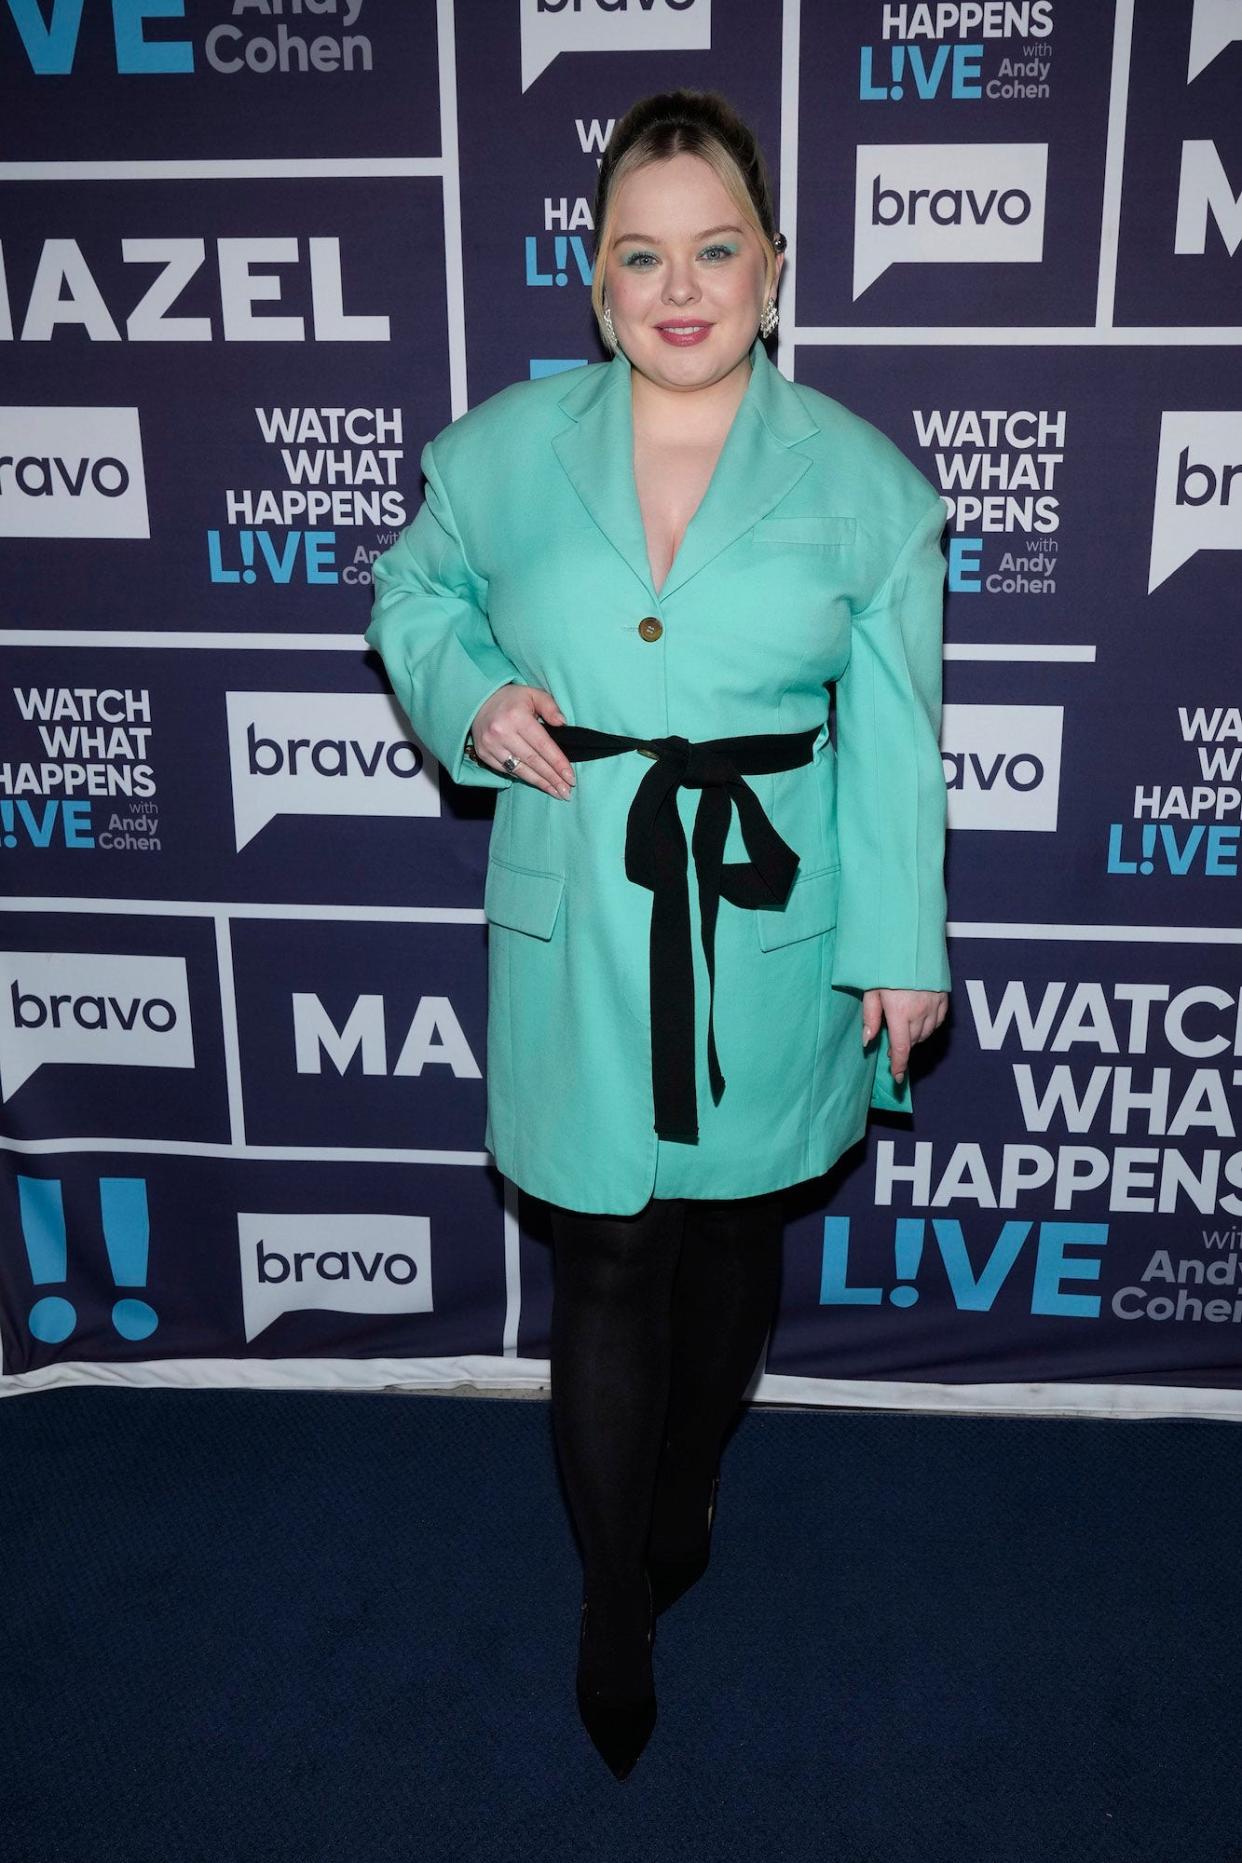 Nicola Coughlan on set for "Watch What Happens Live With Andy Cohen" in New York City.